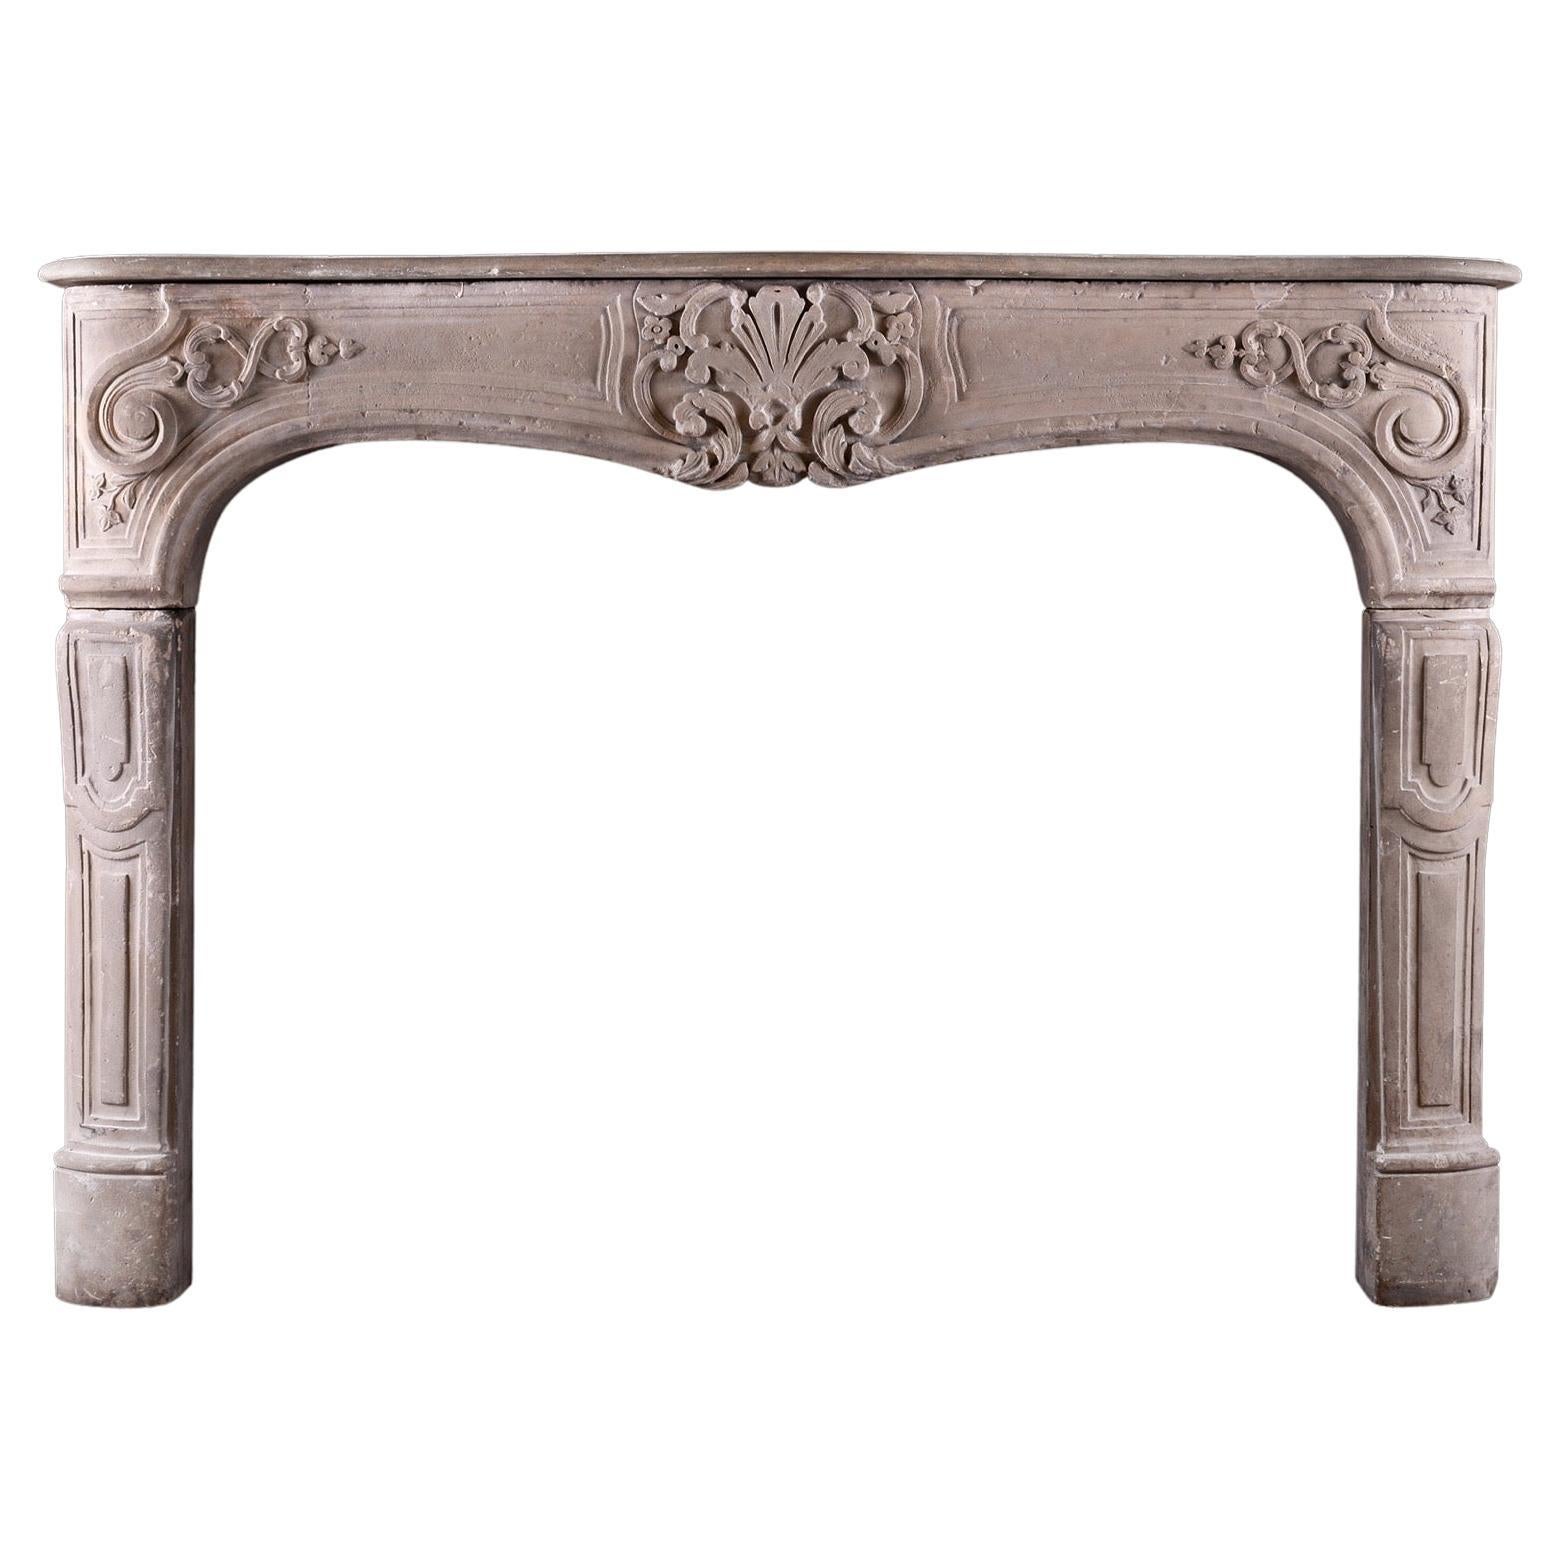 Imposing Period Louis XV Carved Limestone Fireplace For Sale